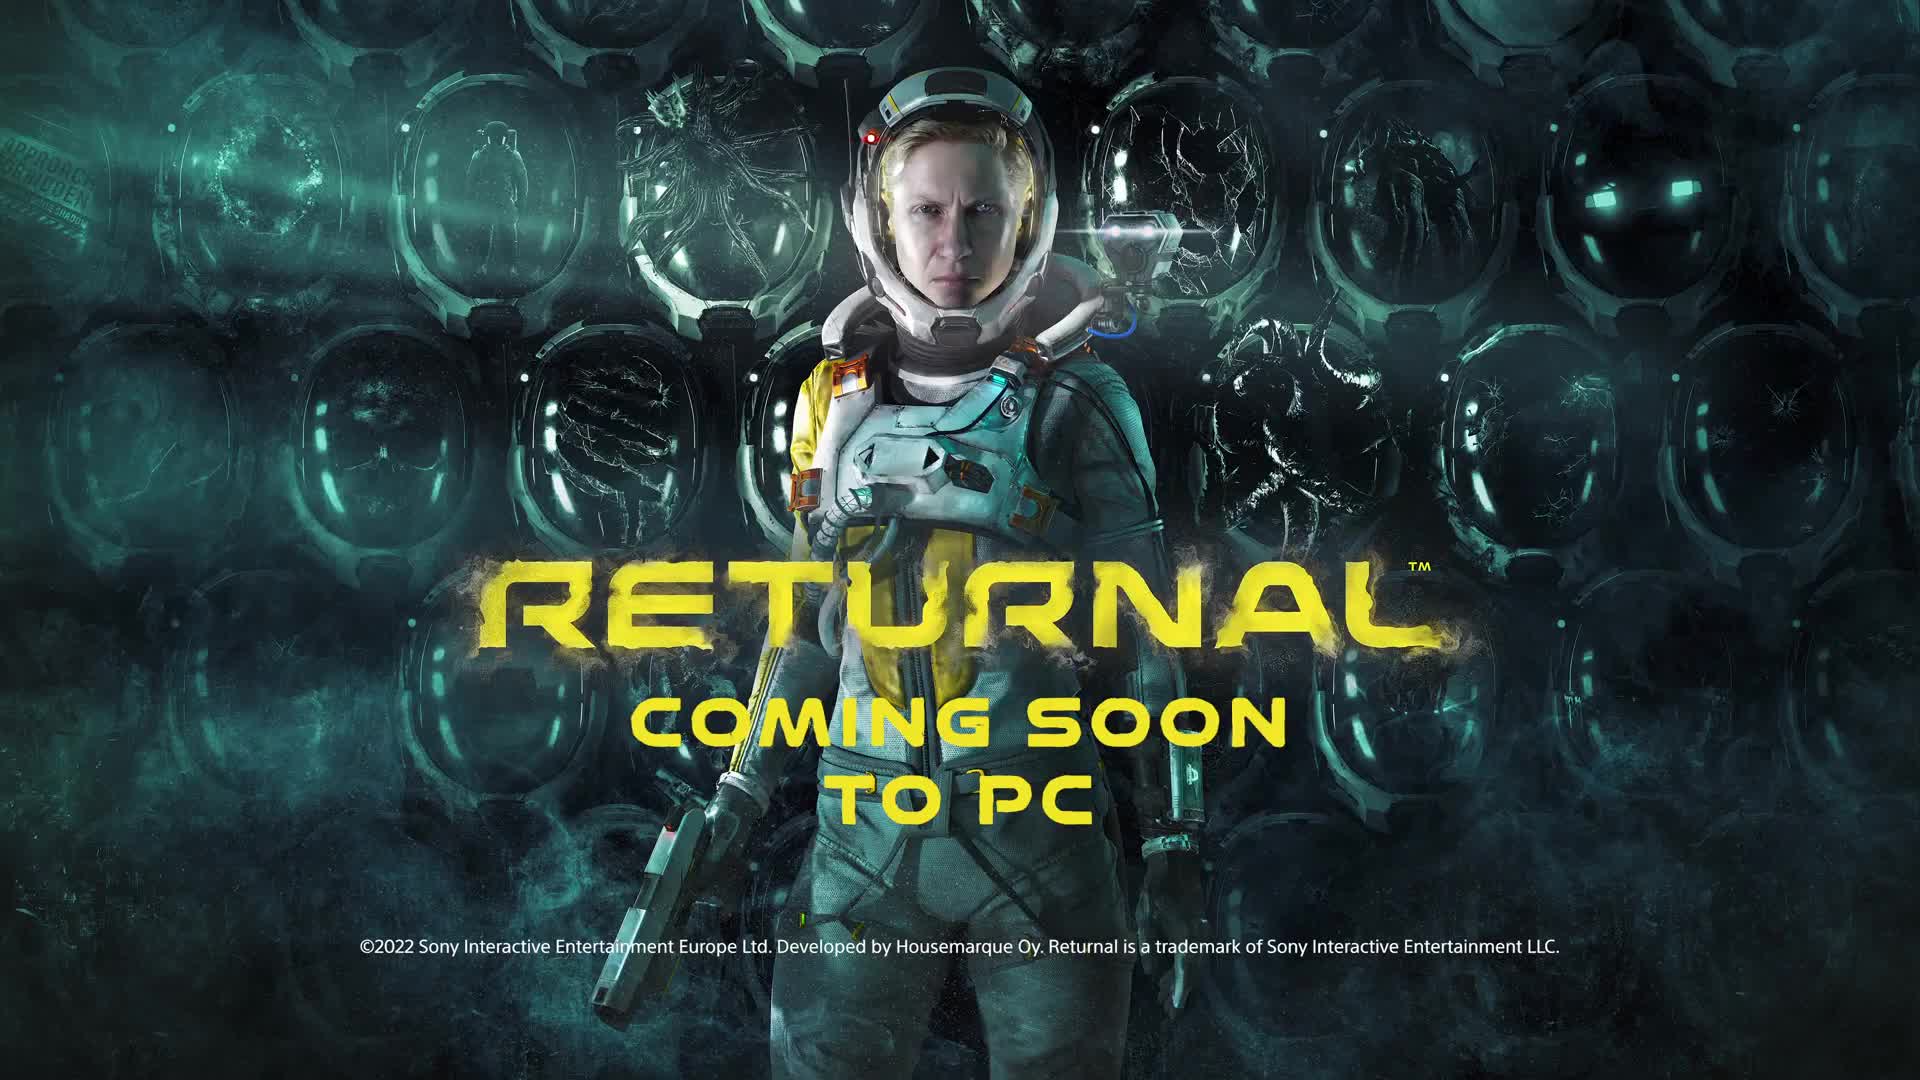 Returnal: Trailer released for the PC version